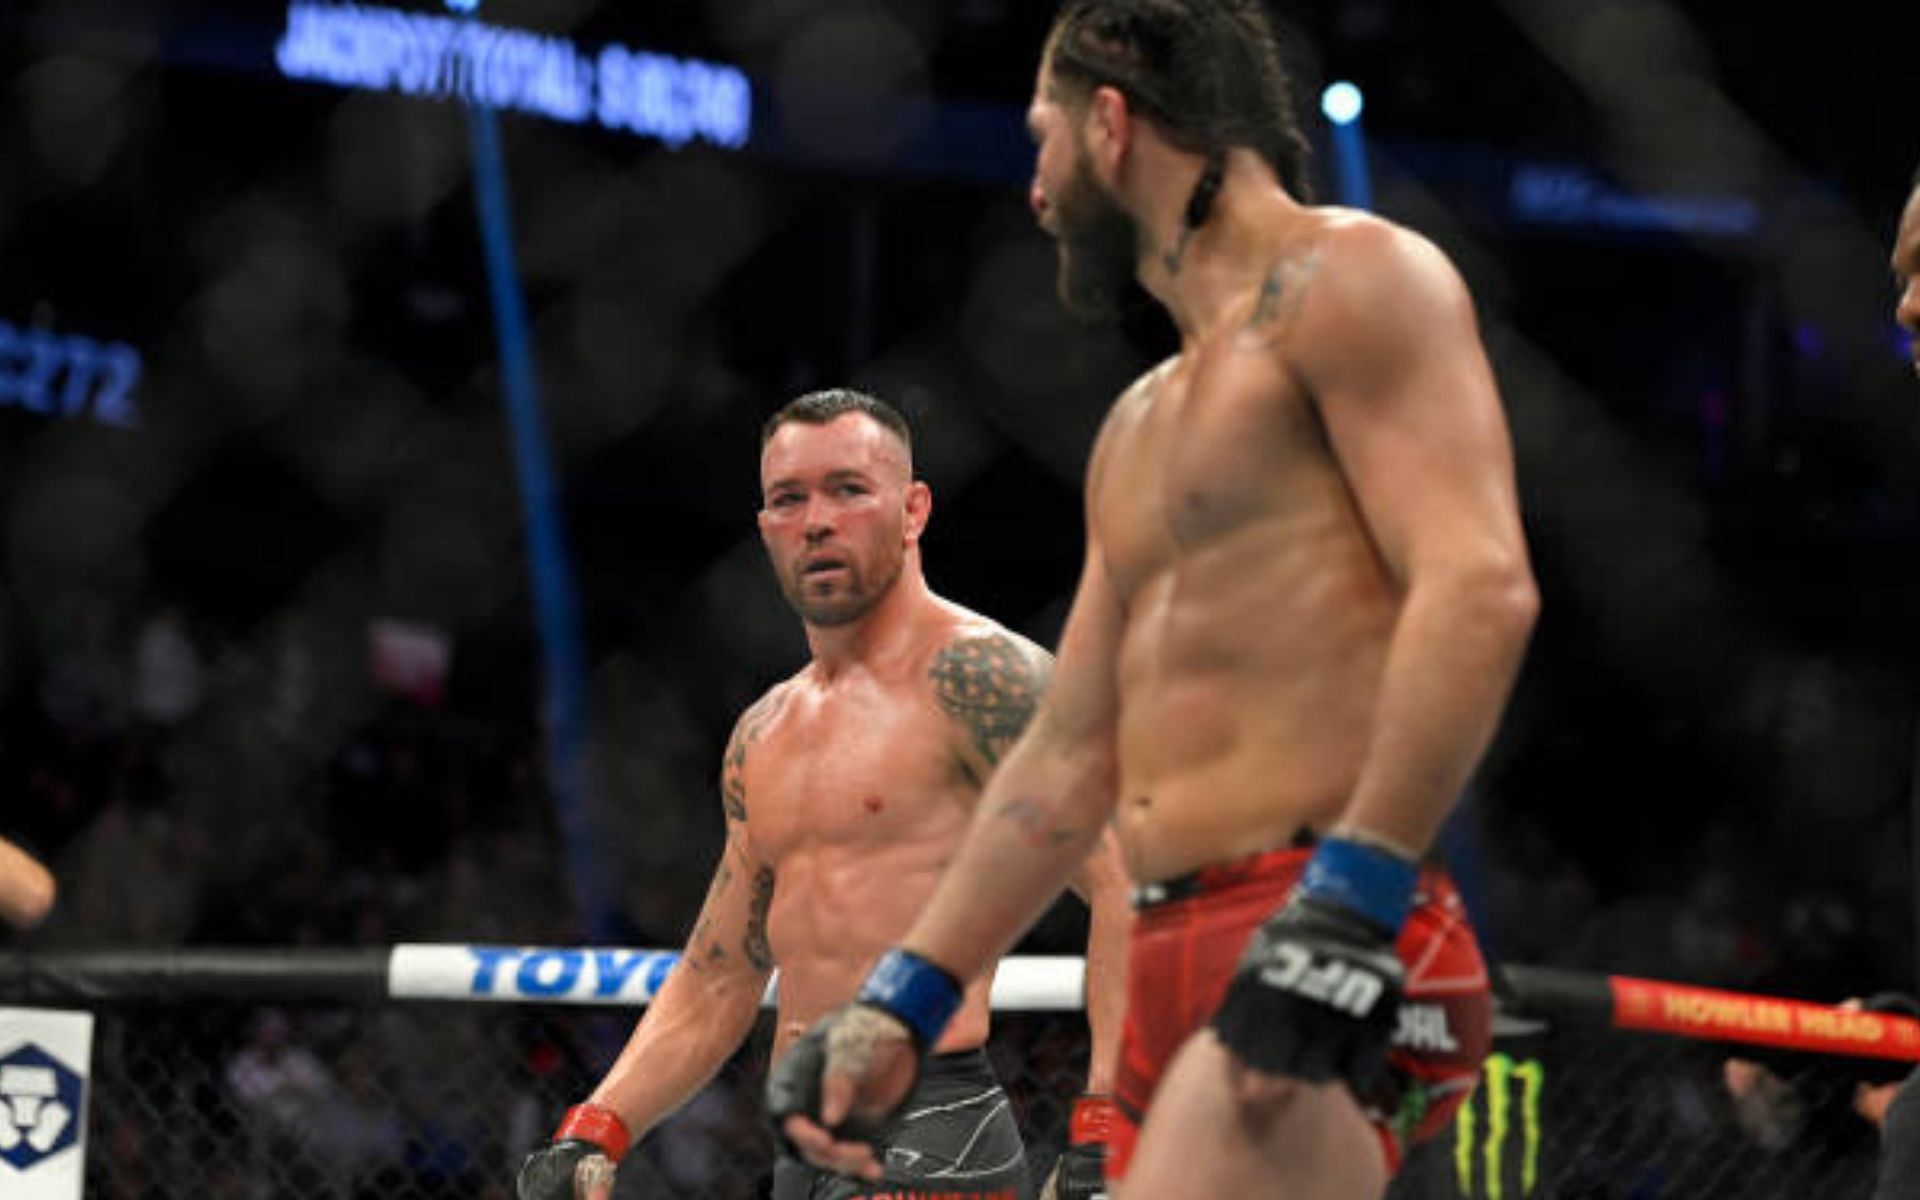 UFC welterweights Jorge Masvidal and Colby Covington